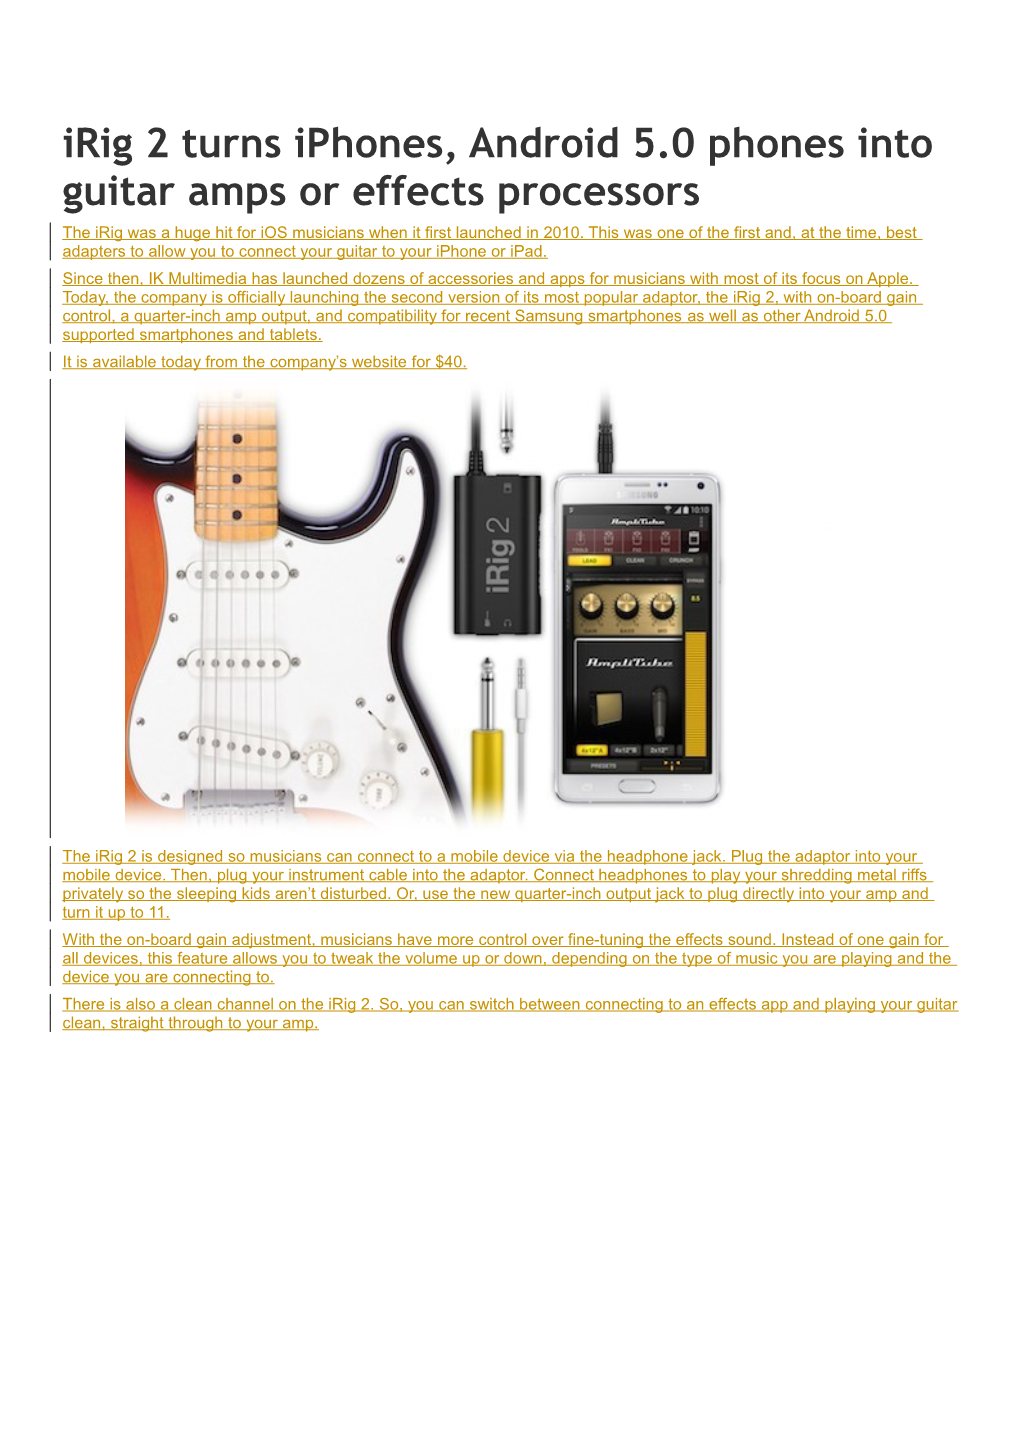 Irig 2 Turns Iphones, Android 5.0 Phones Into Guitar Amps Or Effects Processors